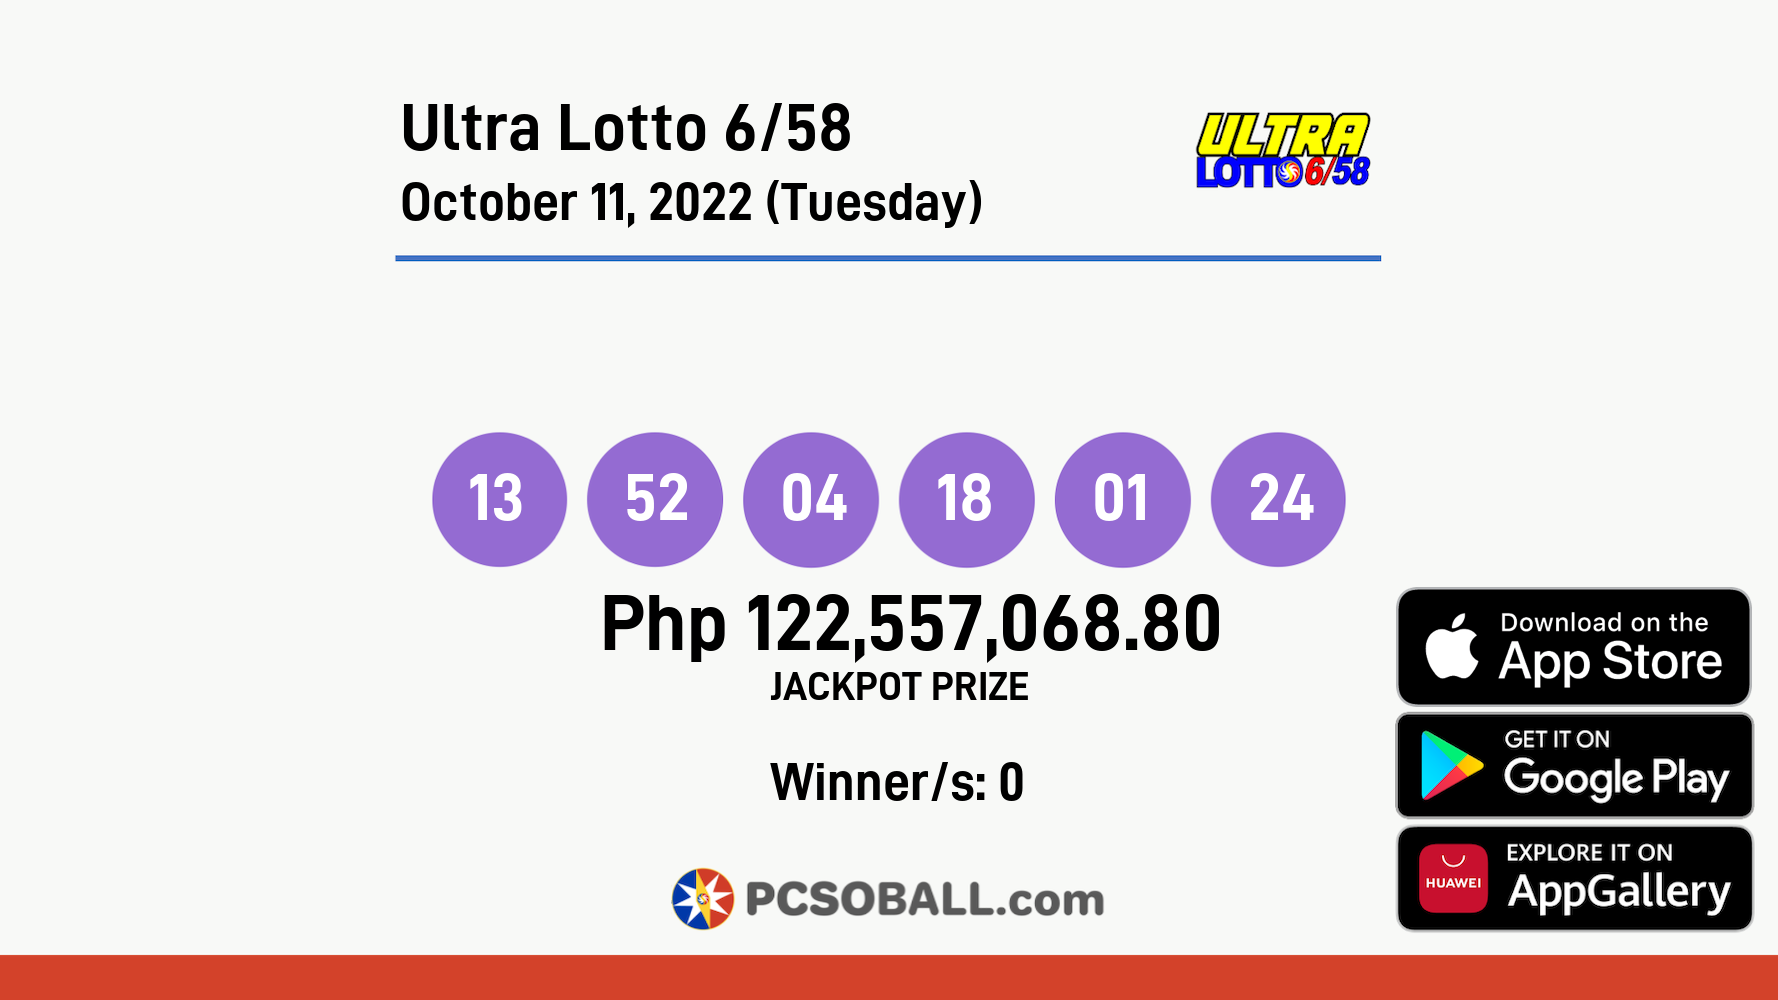 Ultra Lotto 6/58 October 11, 2022 (Tuesday) Result